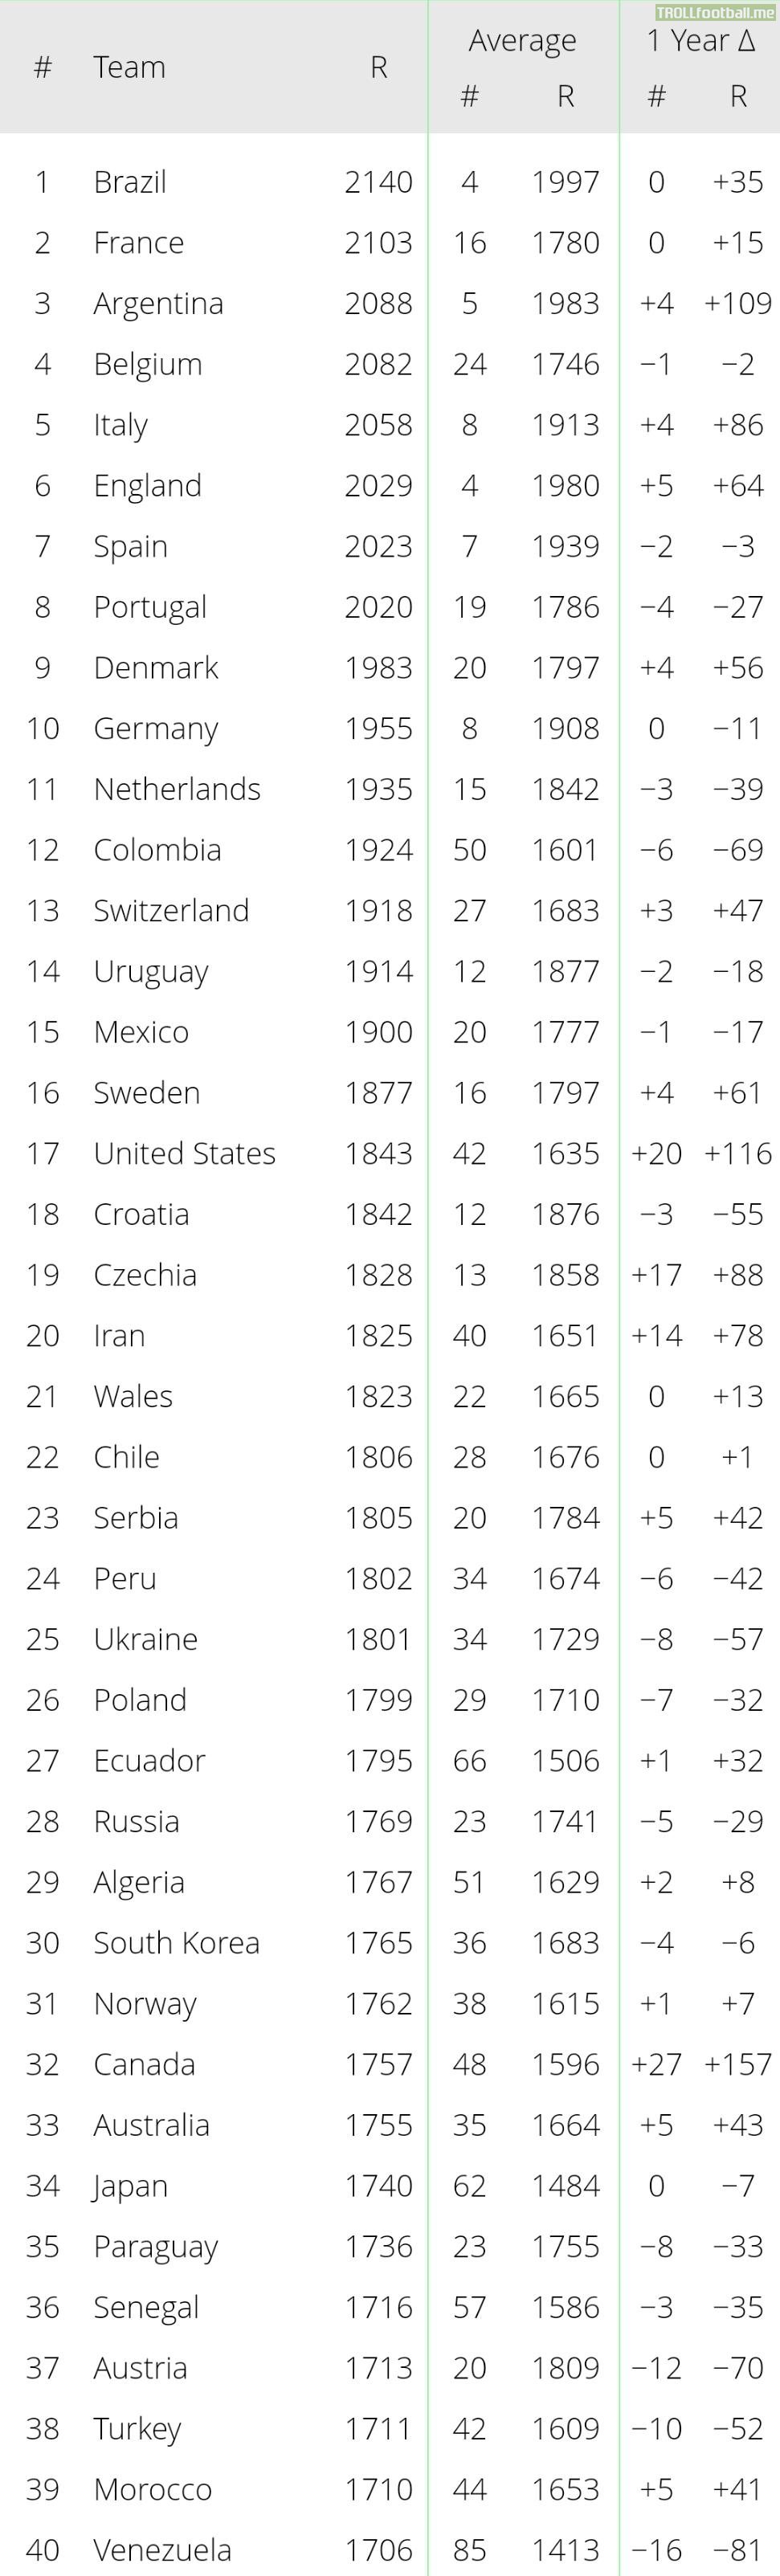 World Football Elo Ratings, following the international break. The top 10: Brazil, France, Argentina, Belgium, Italy, England, Spain, Portugal, Denmark, Germany. Over the past year, Canada has risen by 27 places, and is now ranked 32nd in the world